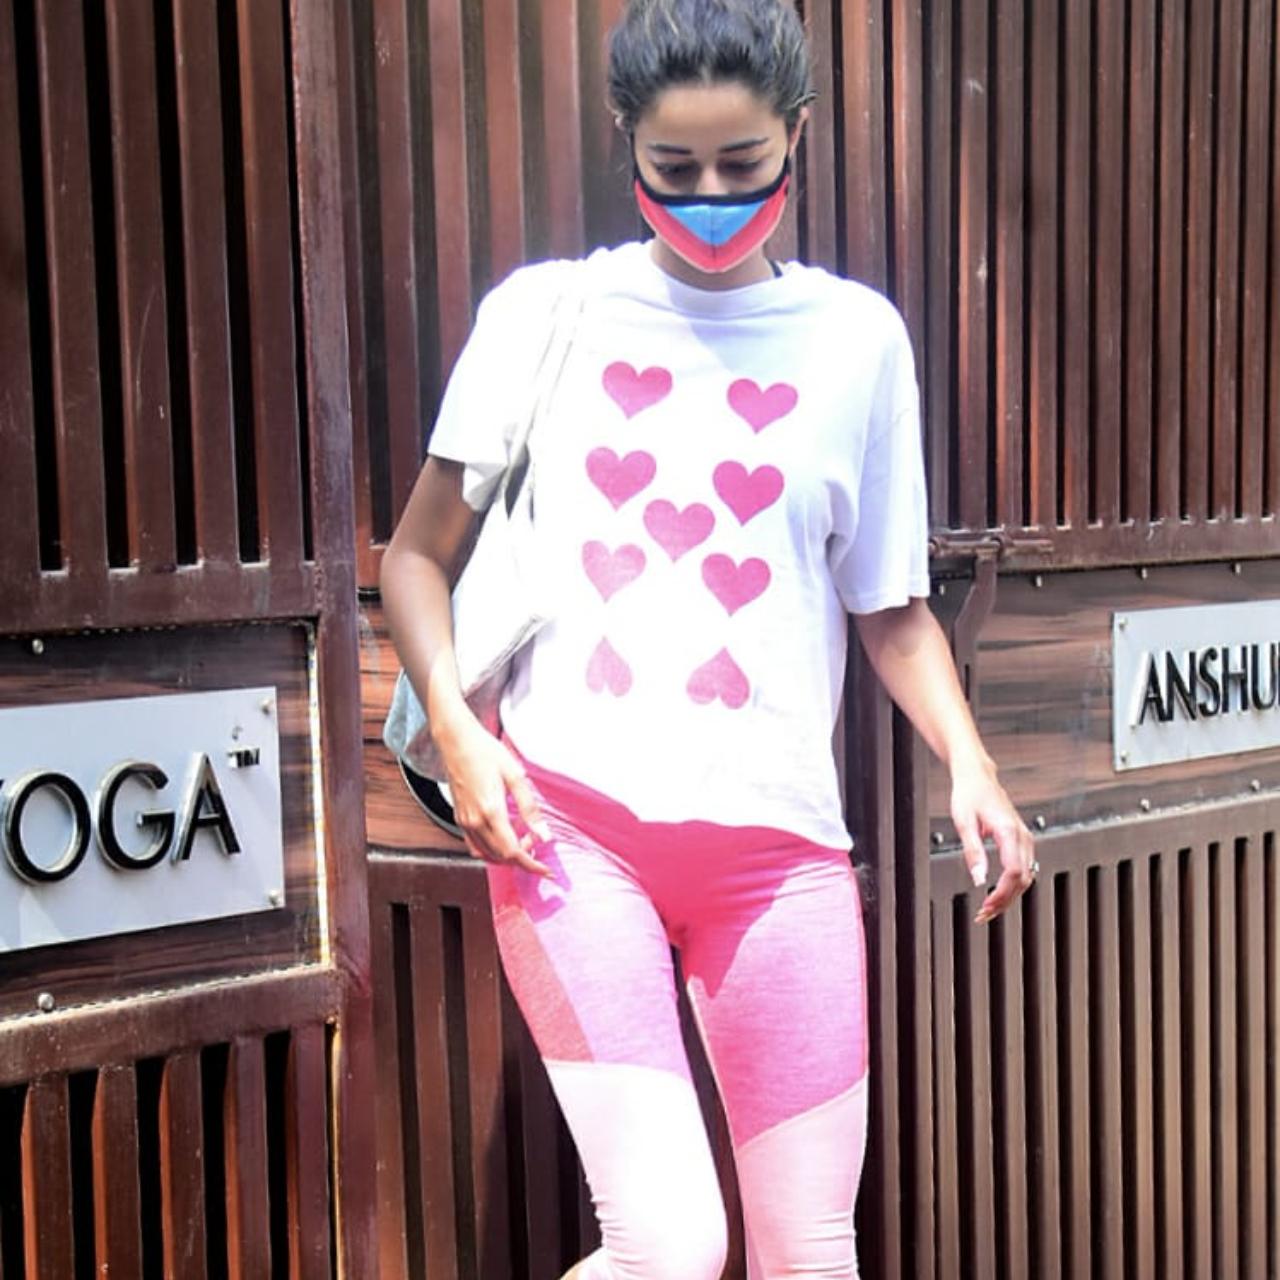 Ananya Panday was clicked at her yoga class in Bandra. The actress looked cute in her white top and pink leggings. She wore a red mask to prevent the spread of COVID-19.